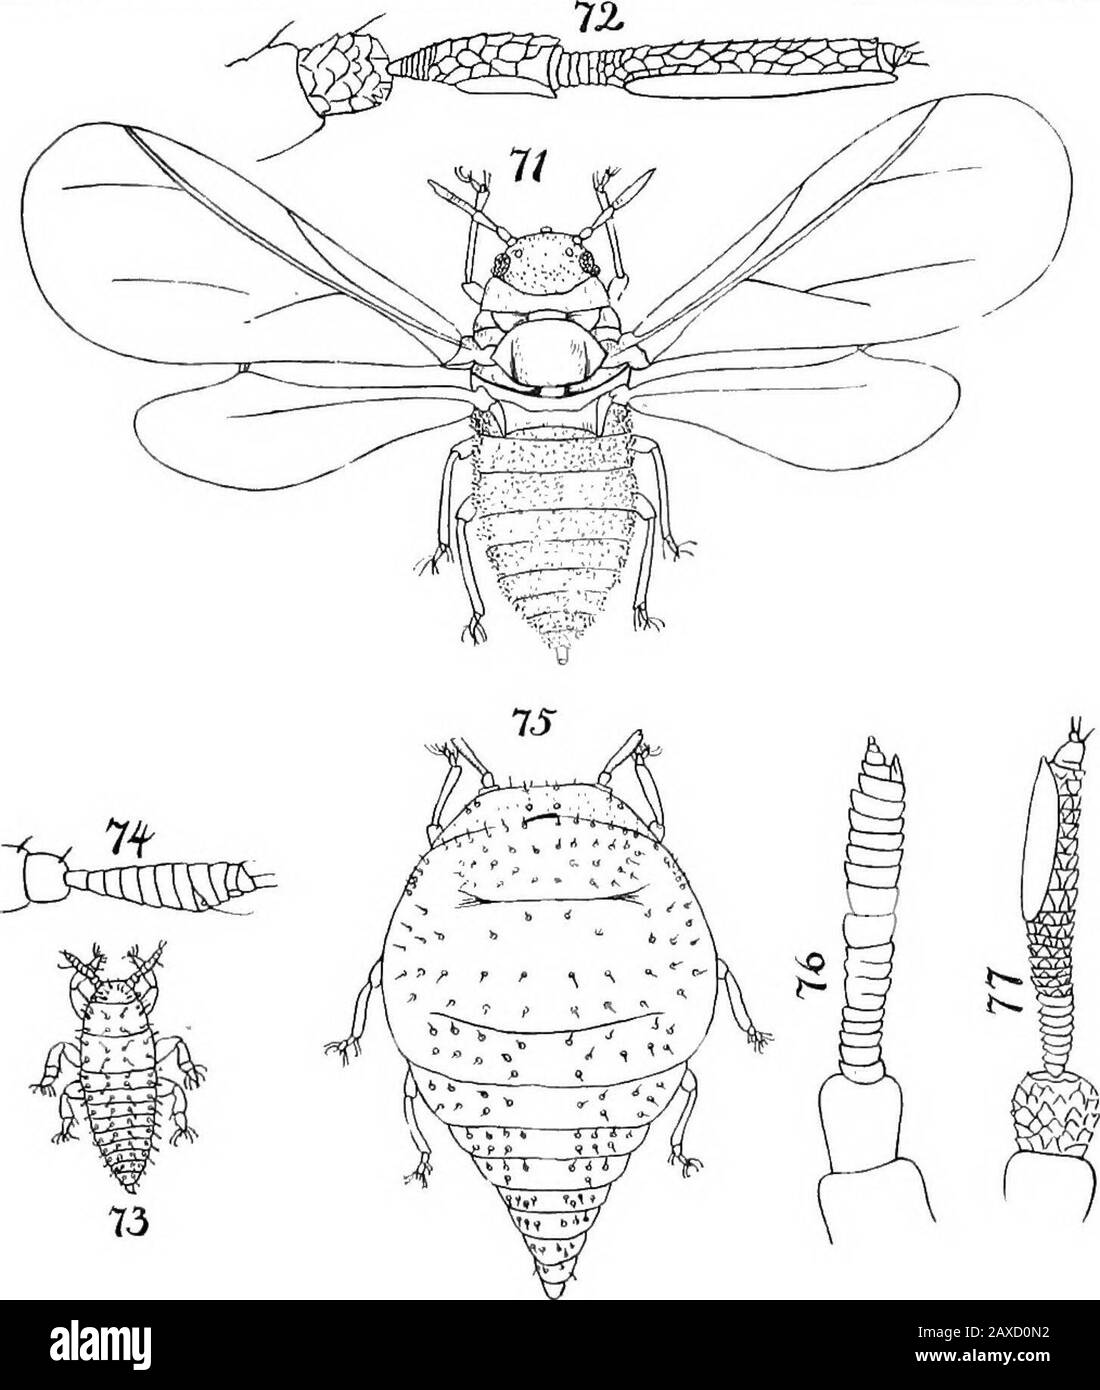 North American Phylloxerinae affecting Hicoria (Carya) and other trees . .-^OHiSS- PLATE XI. Phylloxera c.-fallax Walsh. Fig. 71. Migratory female—enlarged 40 diameters. Fig. 72. Antenna of migratory female -enlarged 250 diameters. Fig. 73. Male—enlarged 40 diameters. Fig. 74. Antenna of male—enlarged 250 diameters. Phylloxera conicum (Shimer). Fig. 75. Stem-mother—enlarged 40 diameters. Fig. 76. Antenna of stem-mother—enlarged 250 diameters. Fig. 77. Antenna of migratory female—enlarged 250 diameters. Fig. 78. Mature gall, vertical section—much enlarged. Phylloxera c.-avellana Riley Fig. 79. Stock Photo